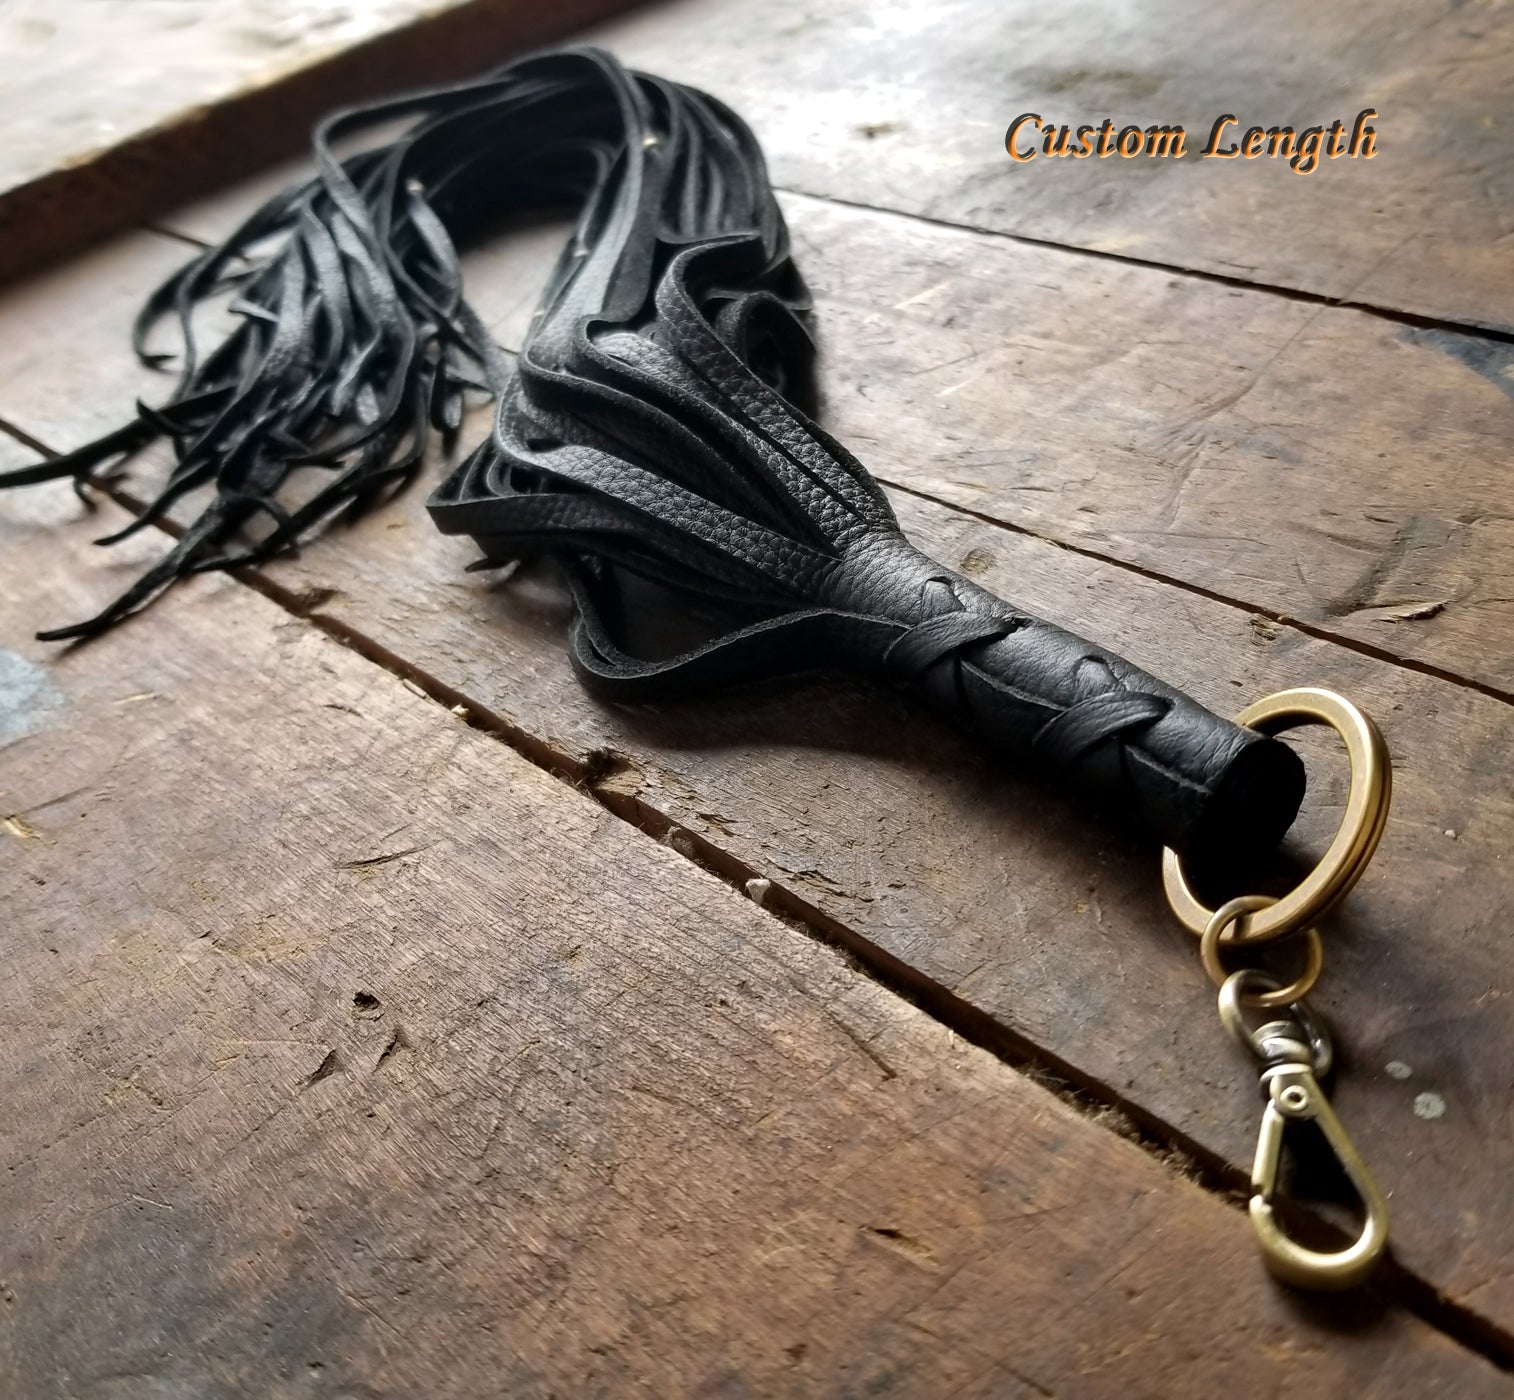 Custom Length Nala Leather Tassel Key Chain in black deerskin with antique brass beads and clip